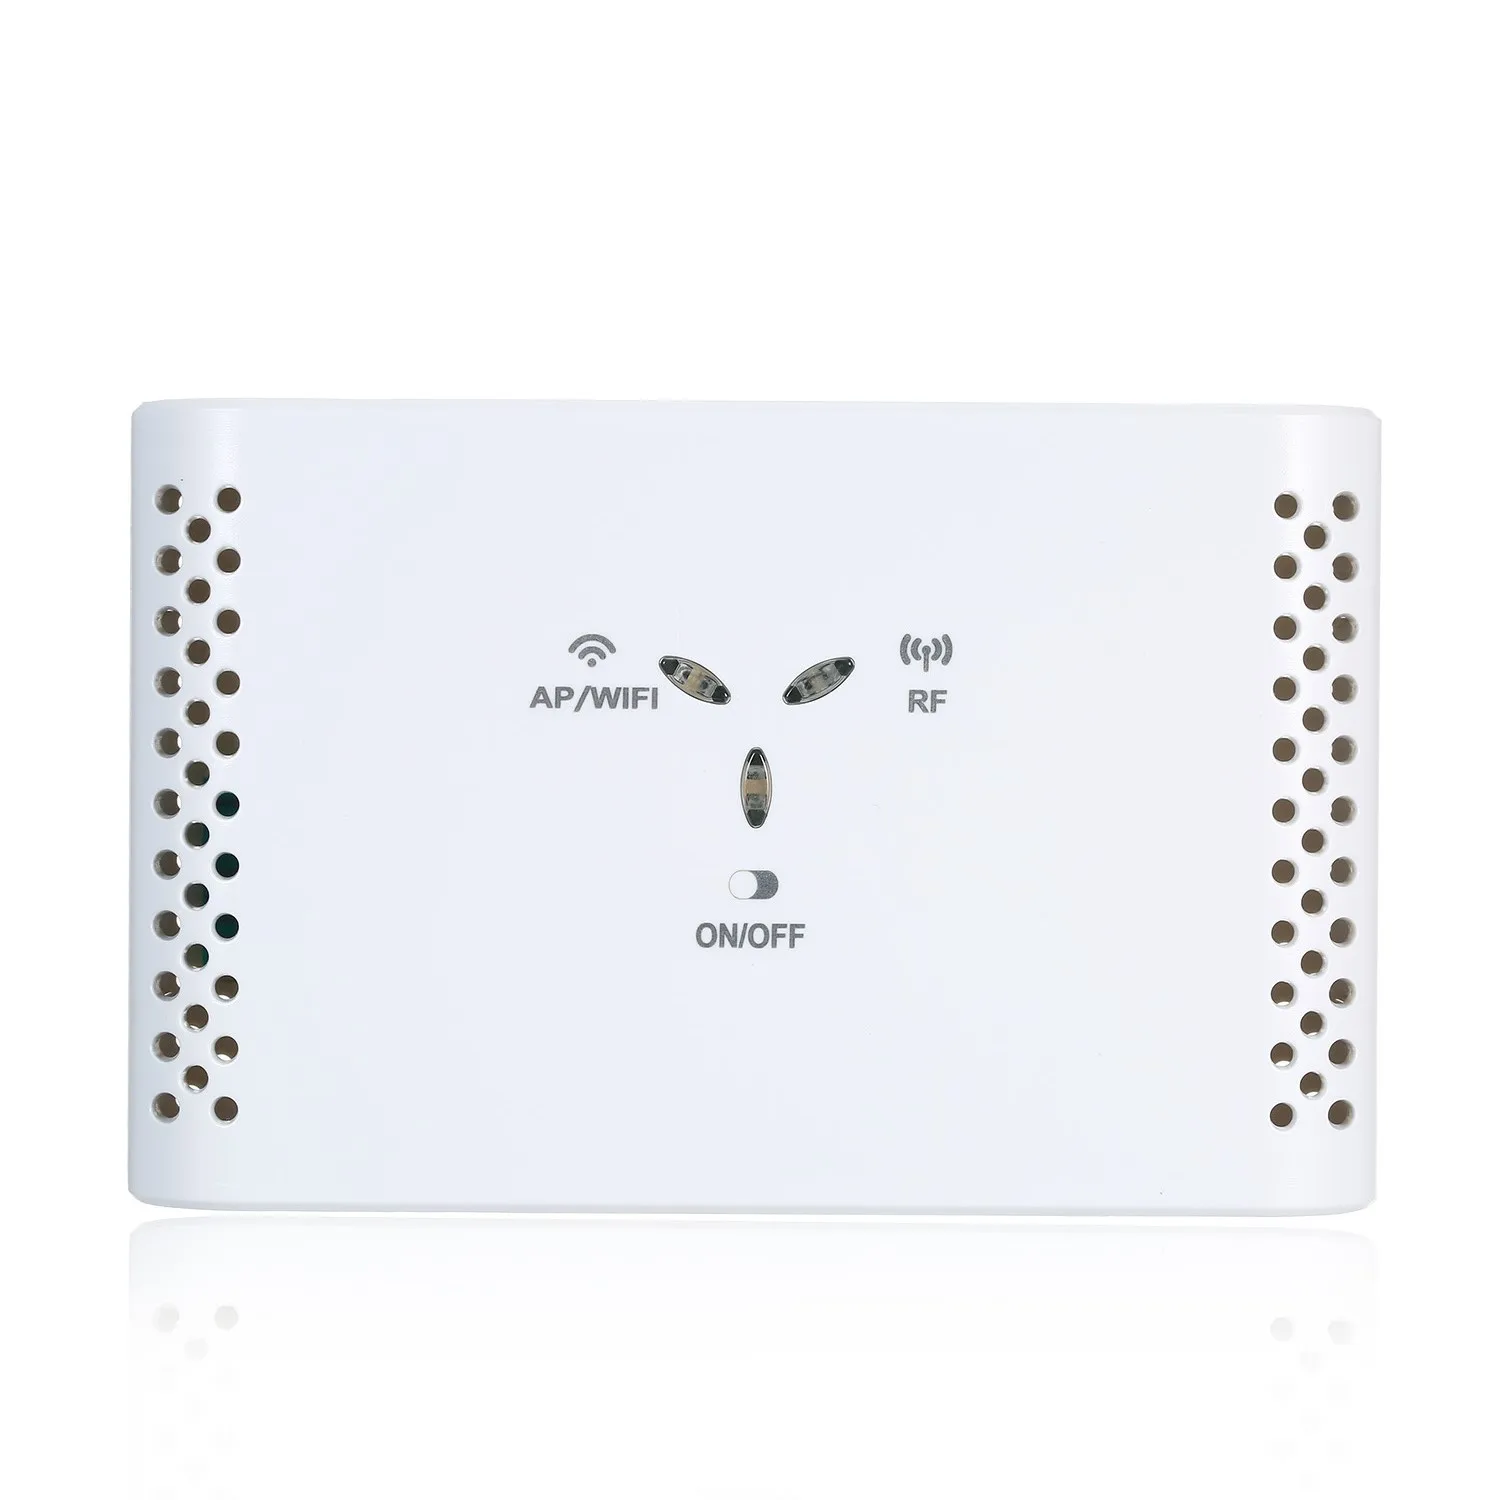 UK/EU WiFi Smart Thermostatic Radiator Valve Temperature Controller for Water/Electric/Gas floor Heating Works with Alexa Google